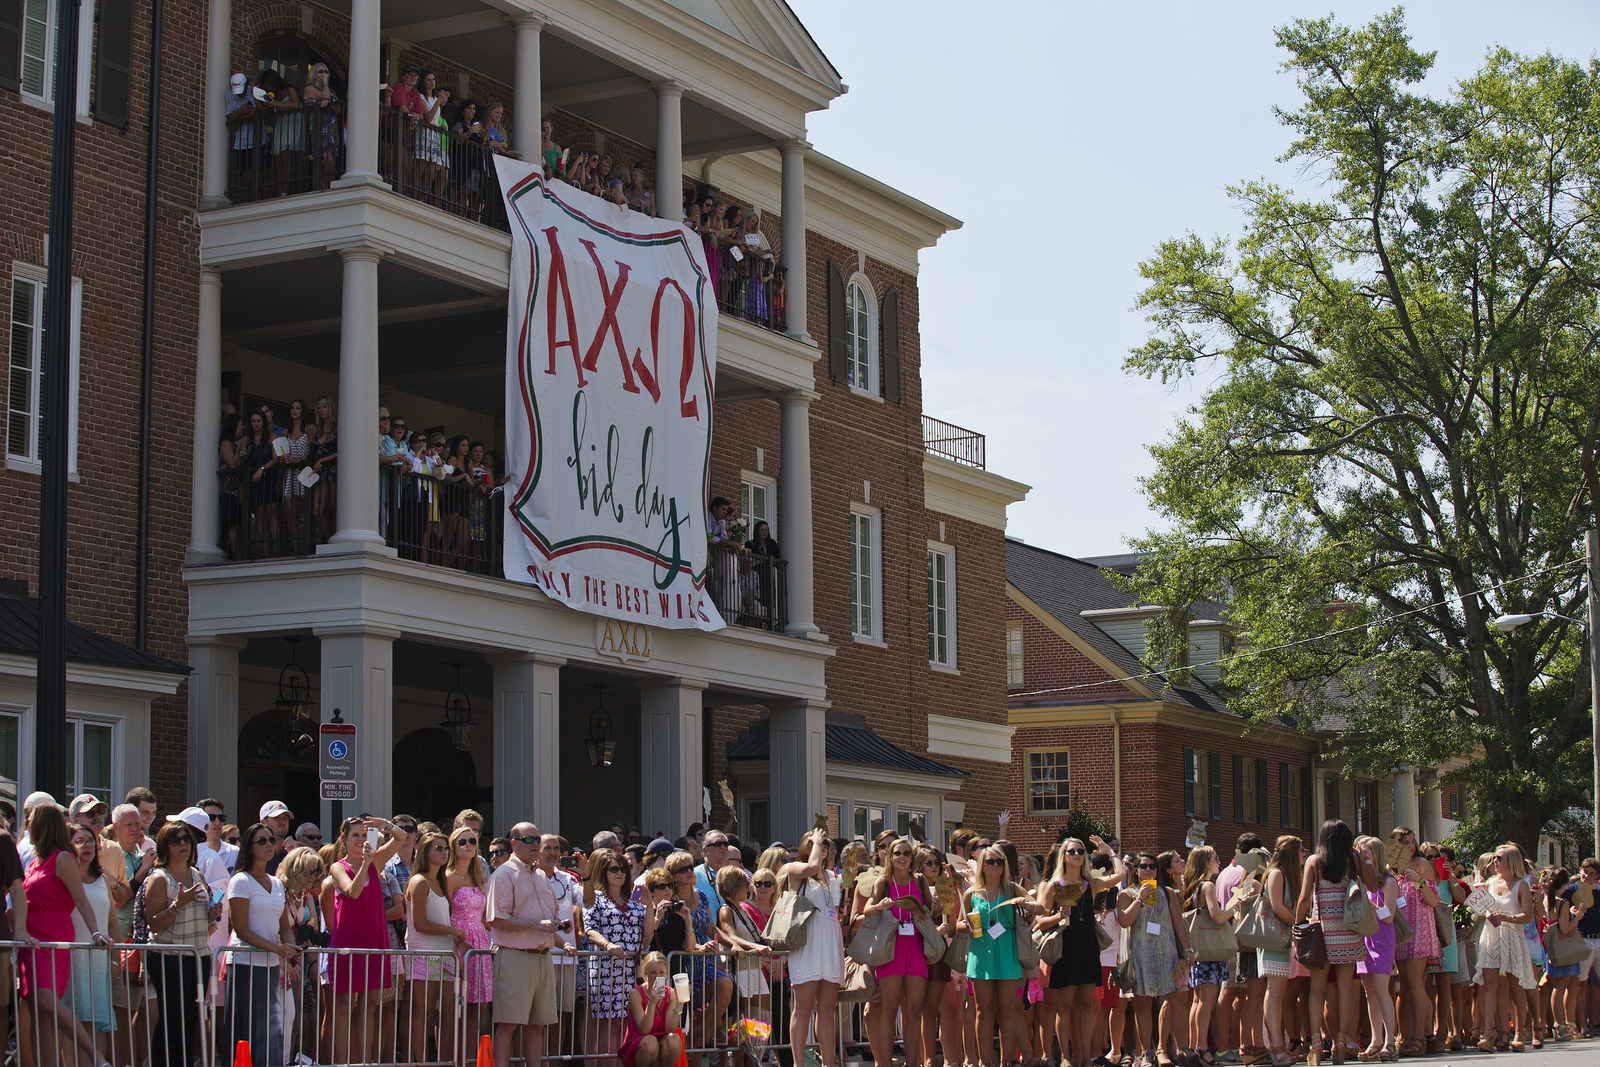 Sorority girls lined up outside a house